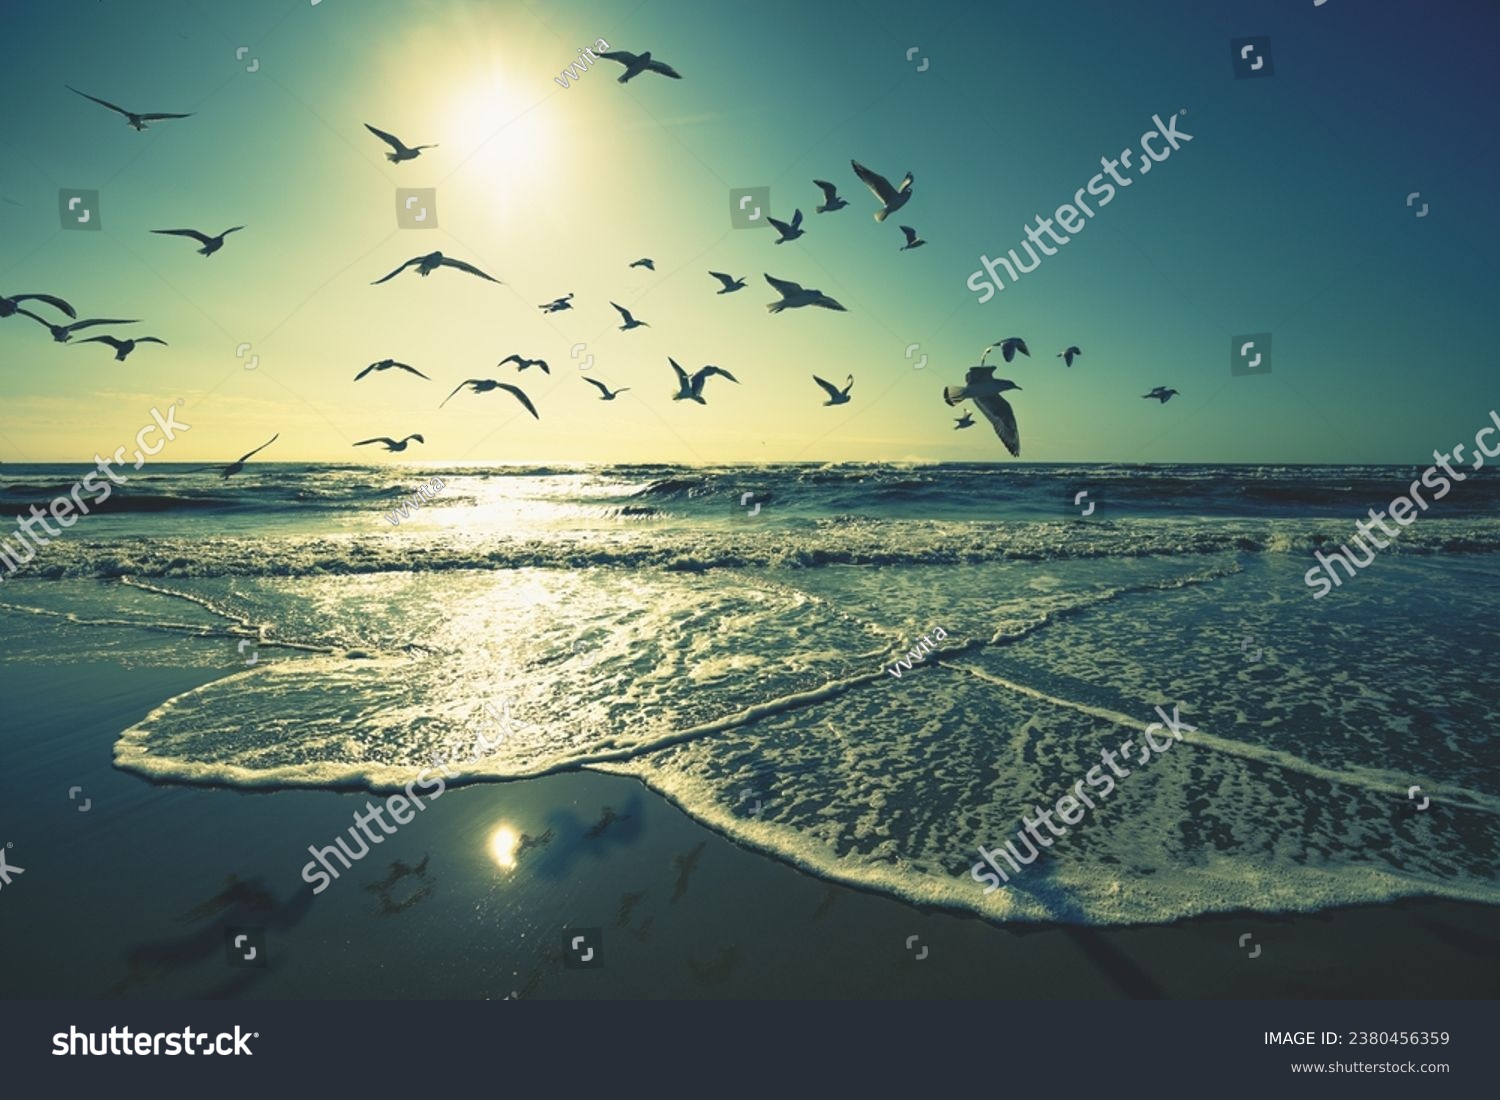 Seascape in the evening. Sunset over the sea. Seagulls flying on the beach. Atlantic ocean in the evening. Porto, Portugal, Europe #2380456359